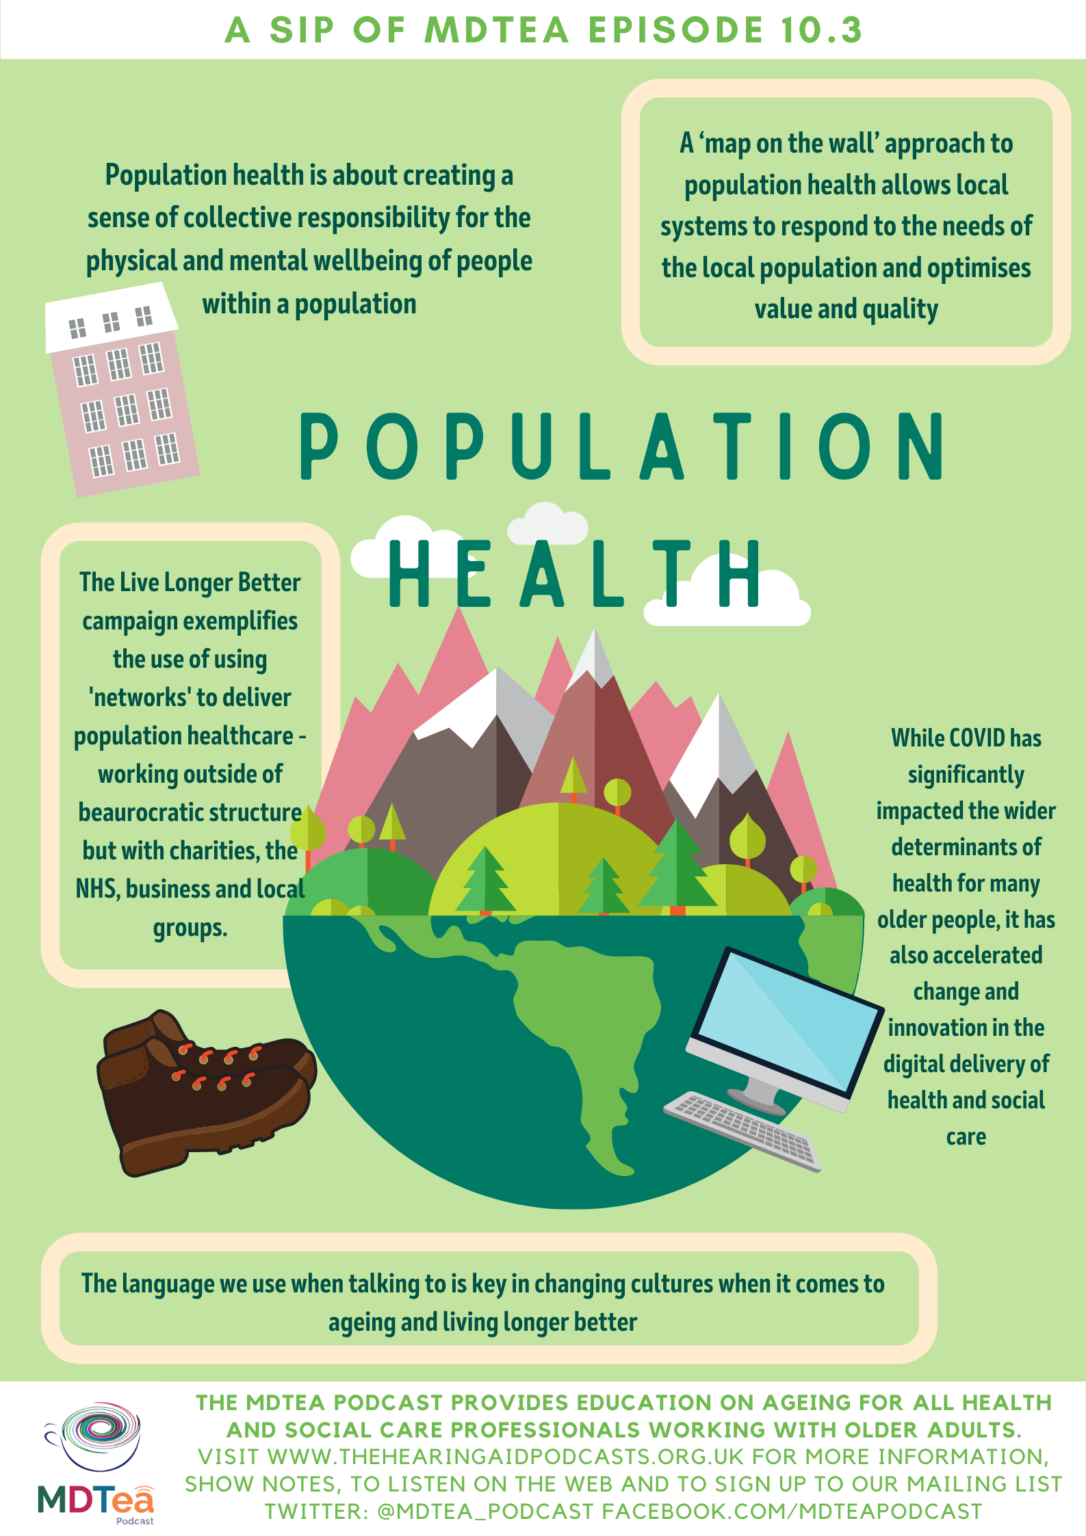 Population health and ageing The Hearing Aid Podcasts